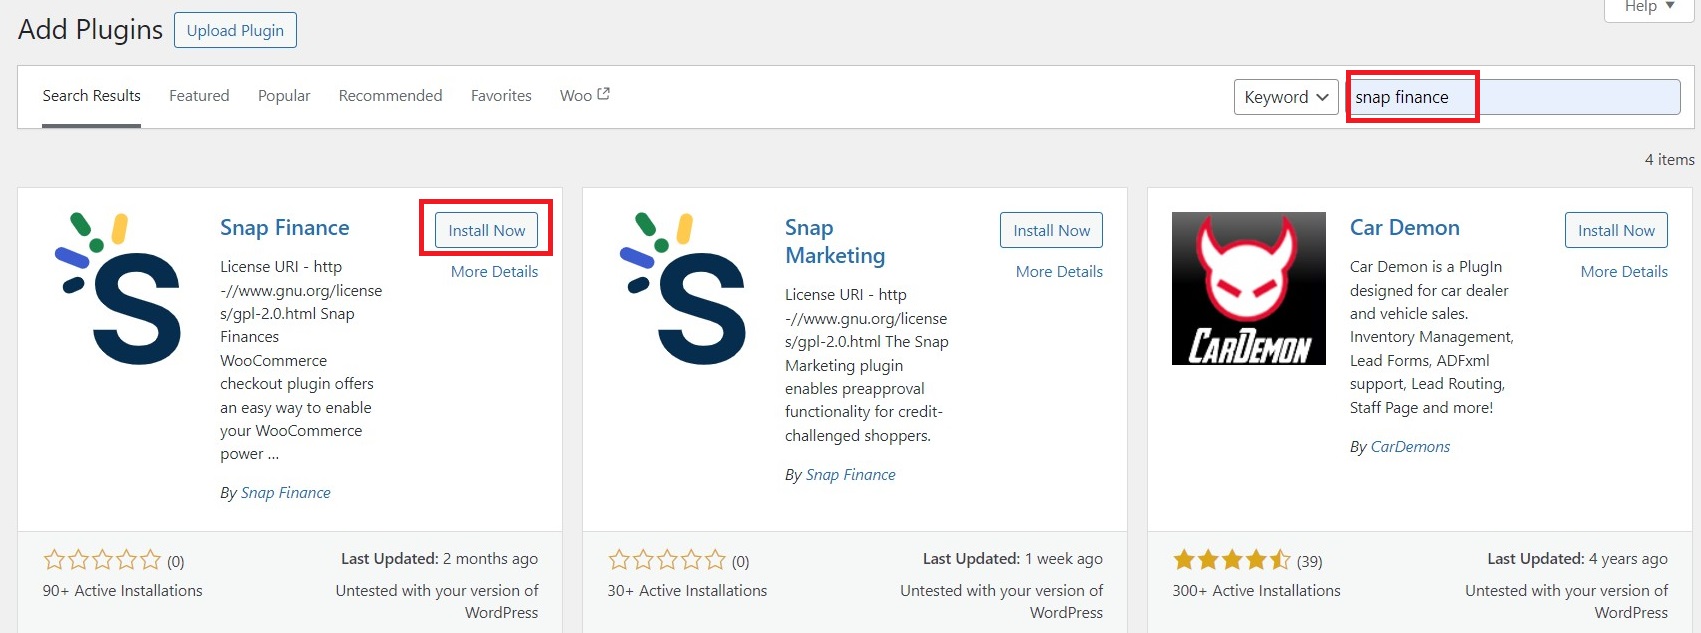 Image for Search Snap finance Plugin